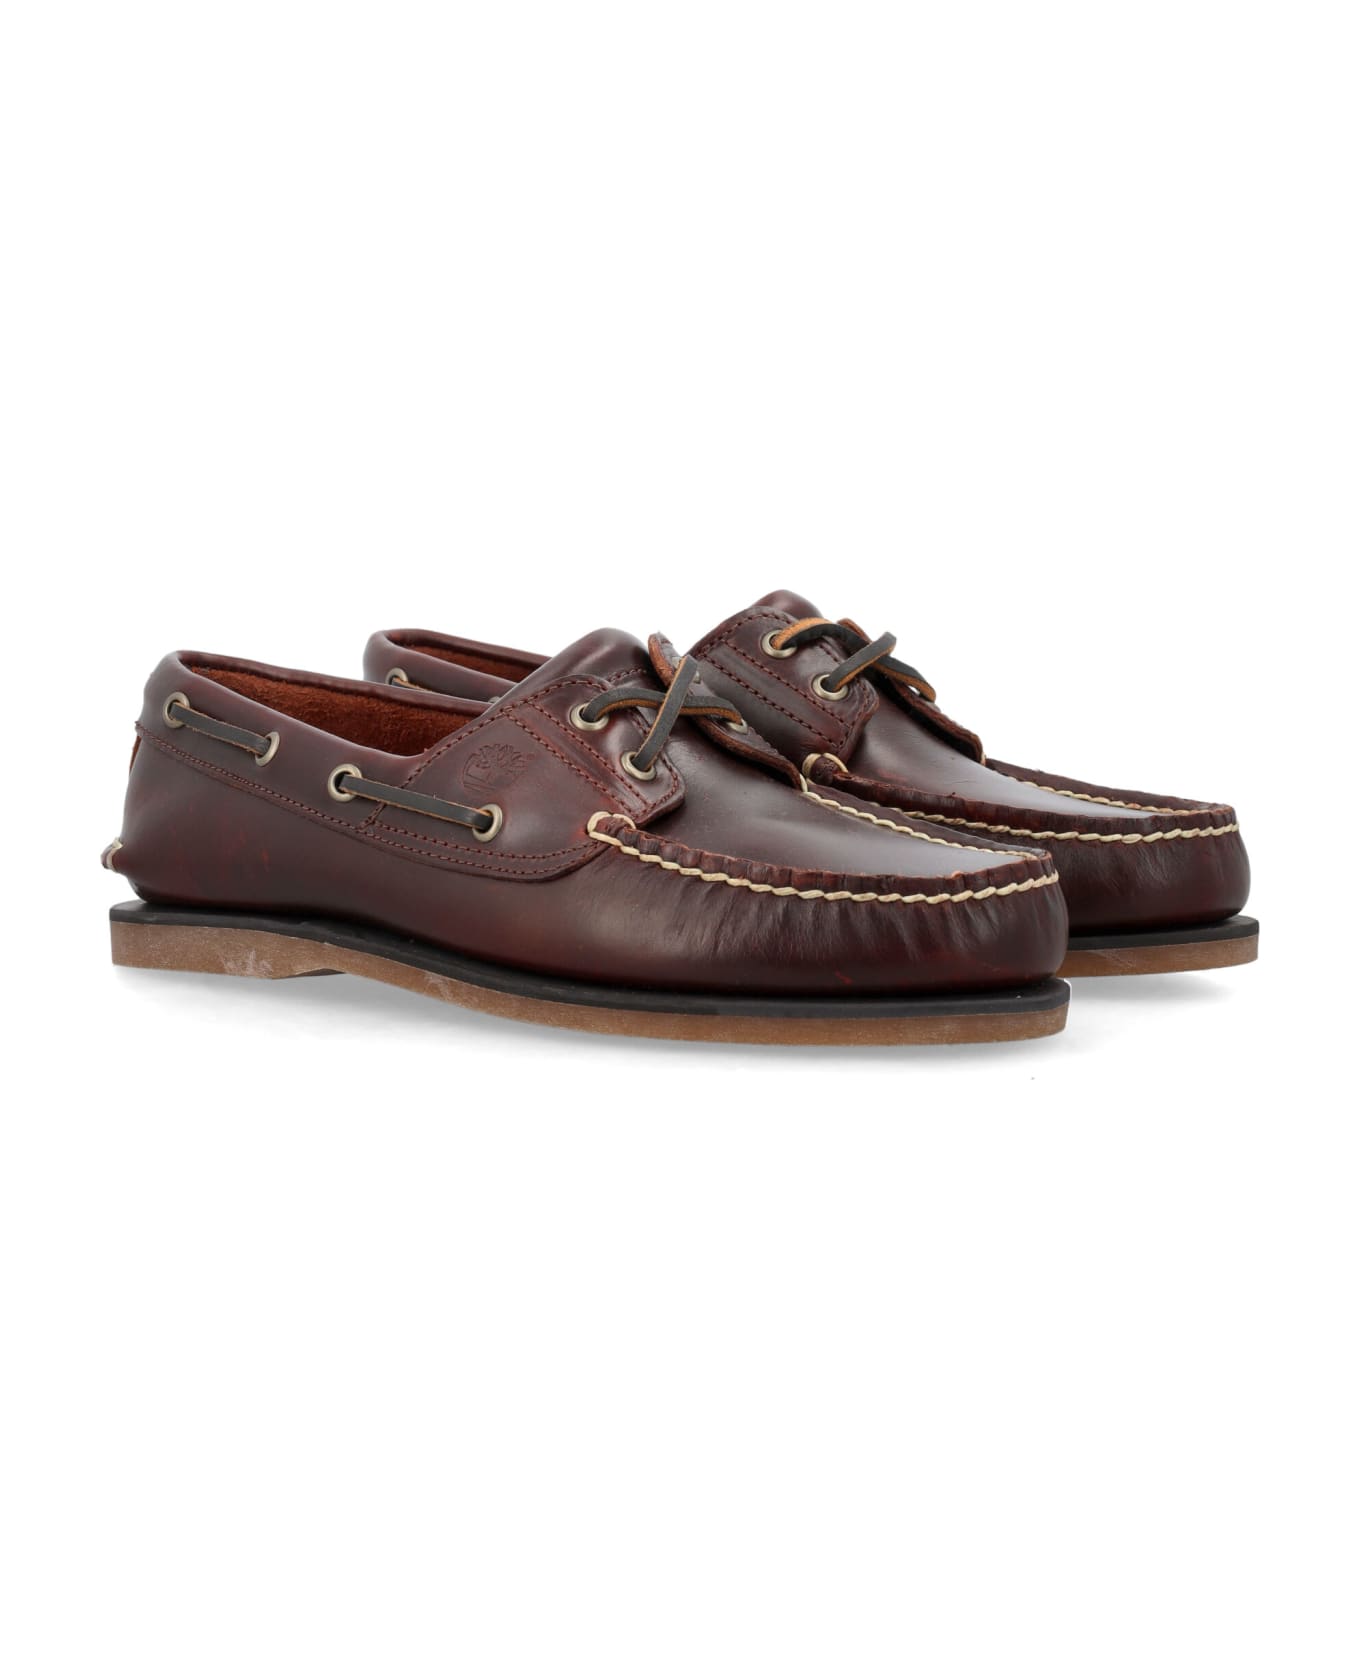 Timberland Classic Boat Loafer - MID BROWN